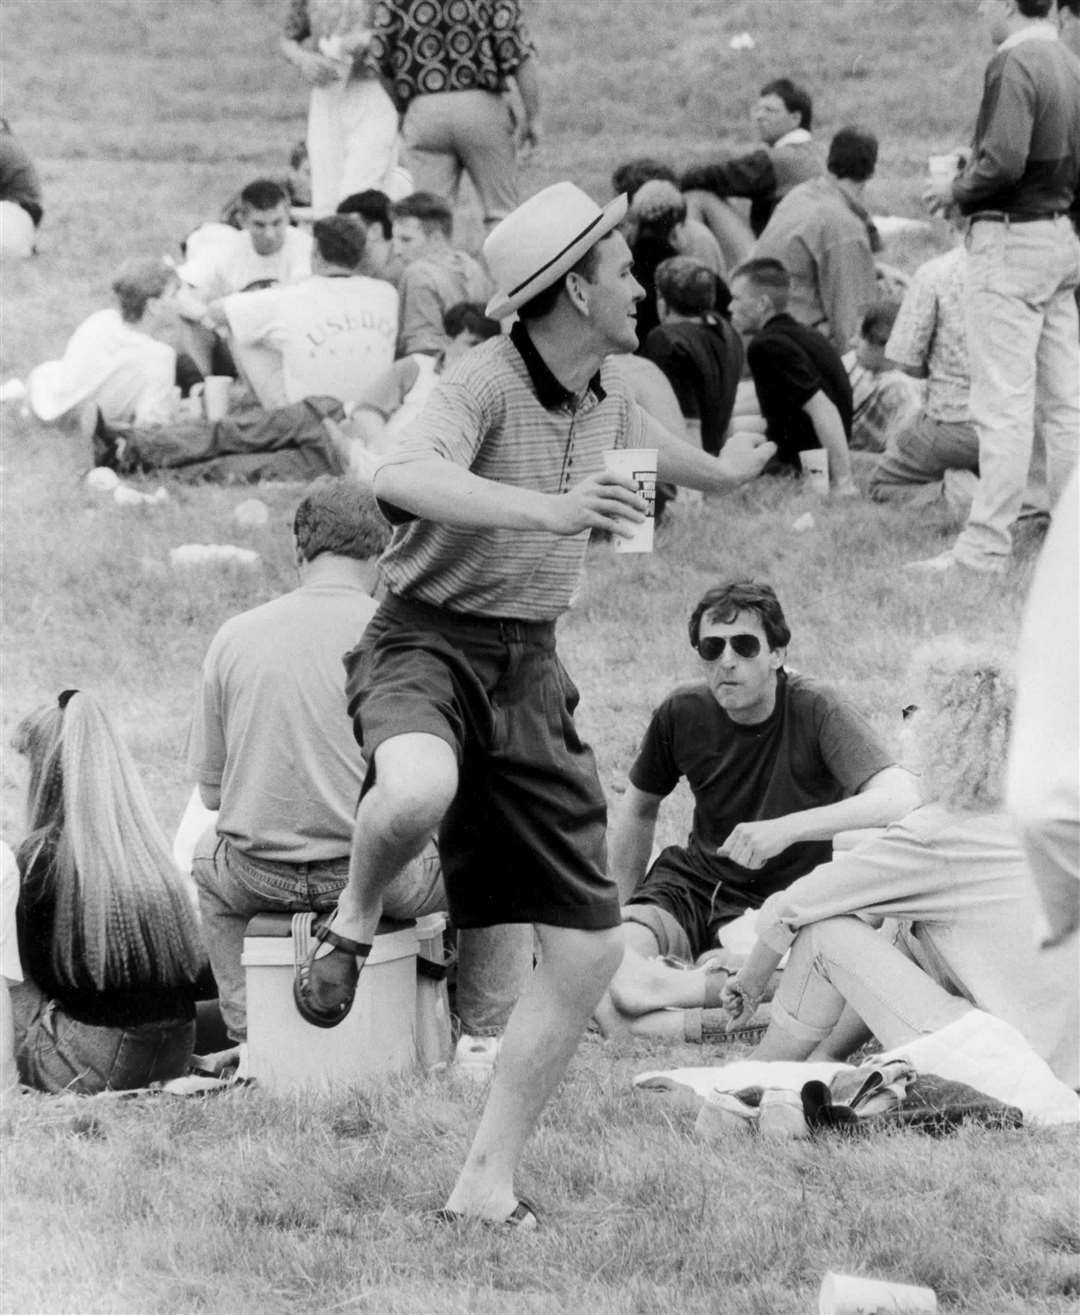 Dancing away in shorts and summer hat on the sunny Saturday in May 1991